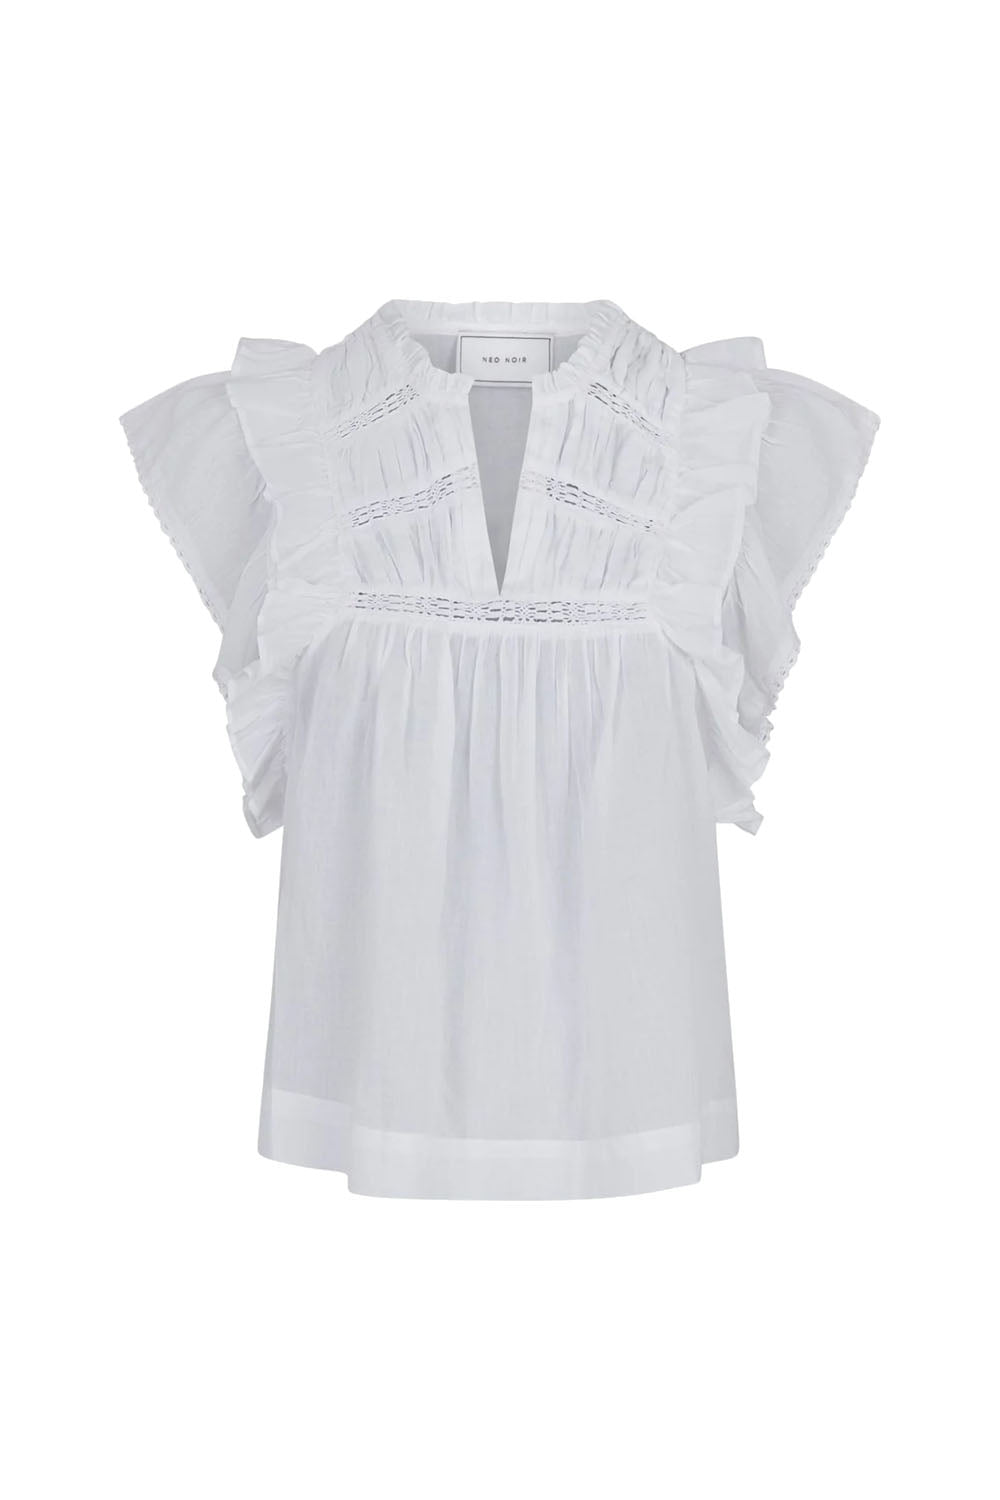 Jayla S Voile Top White